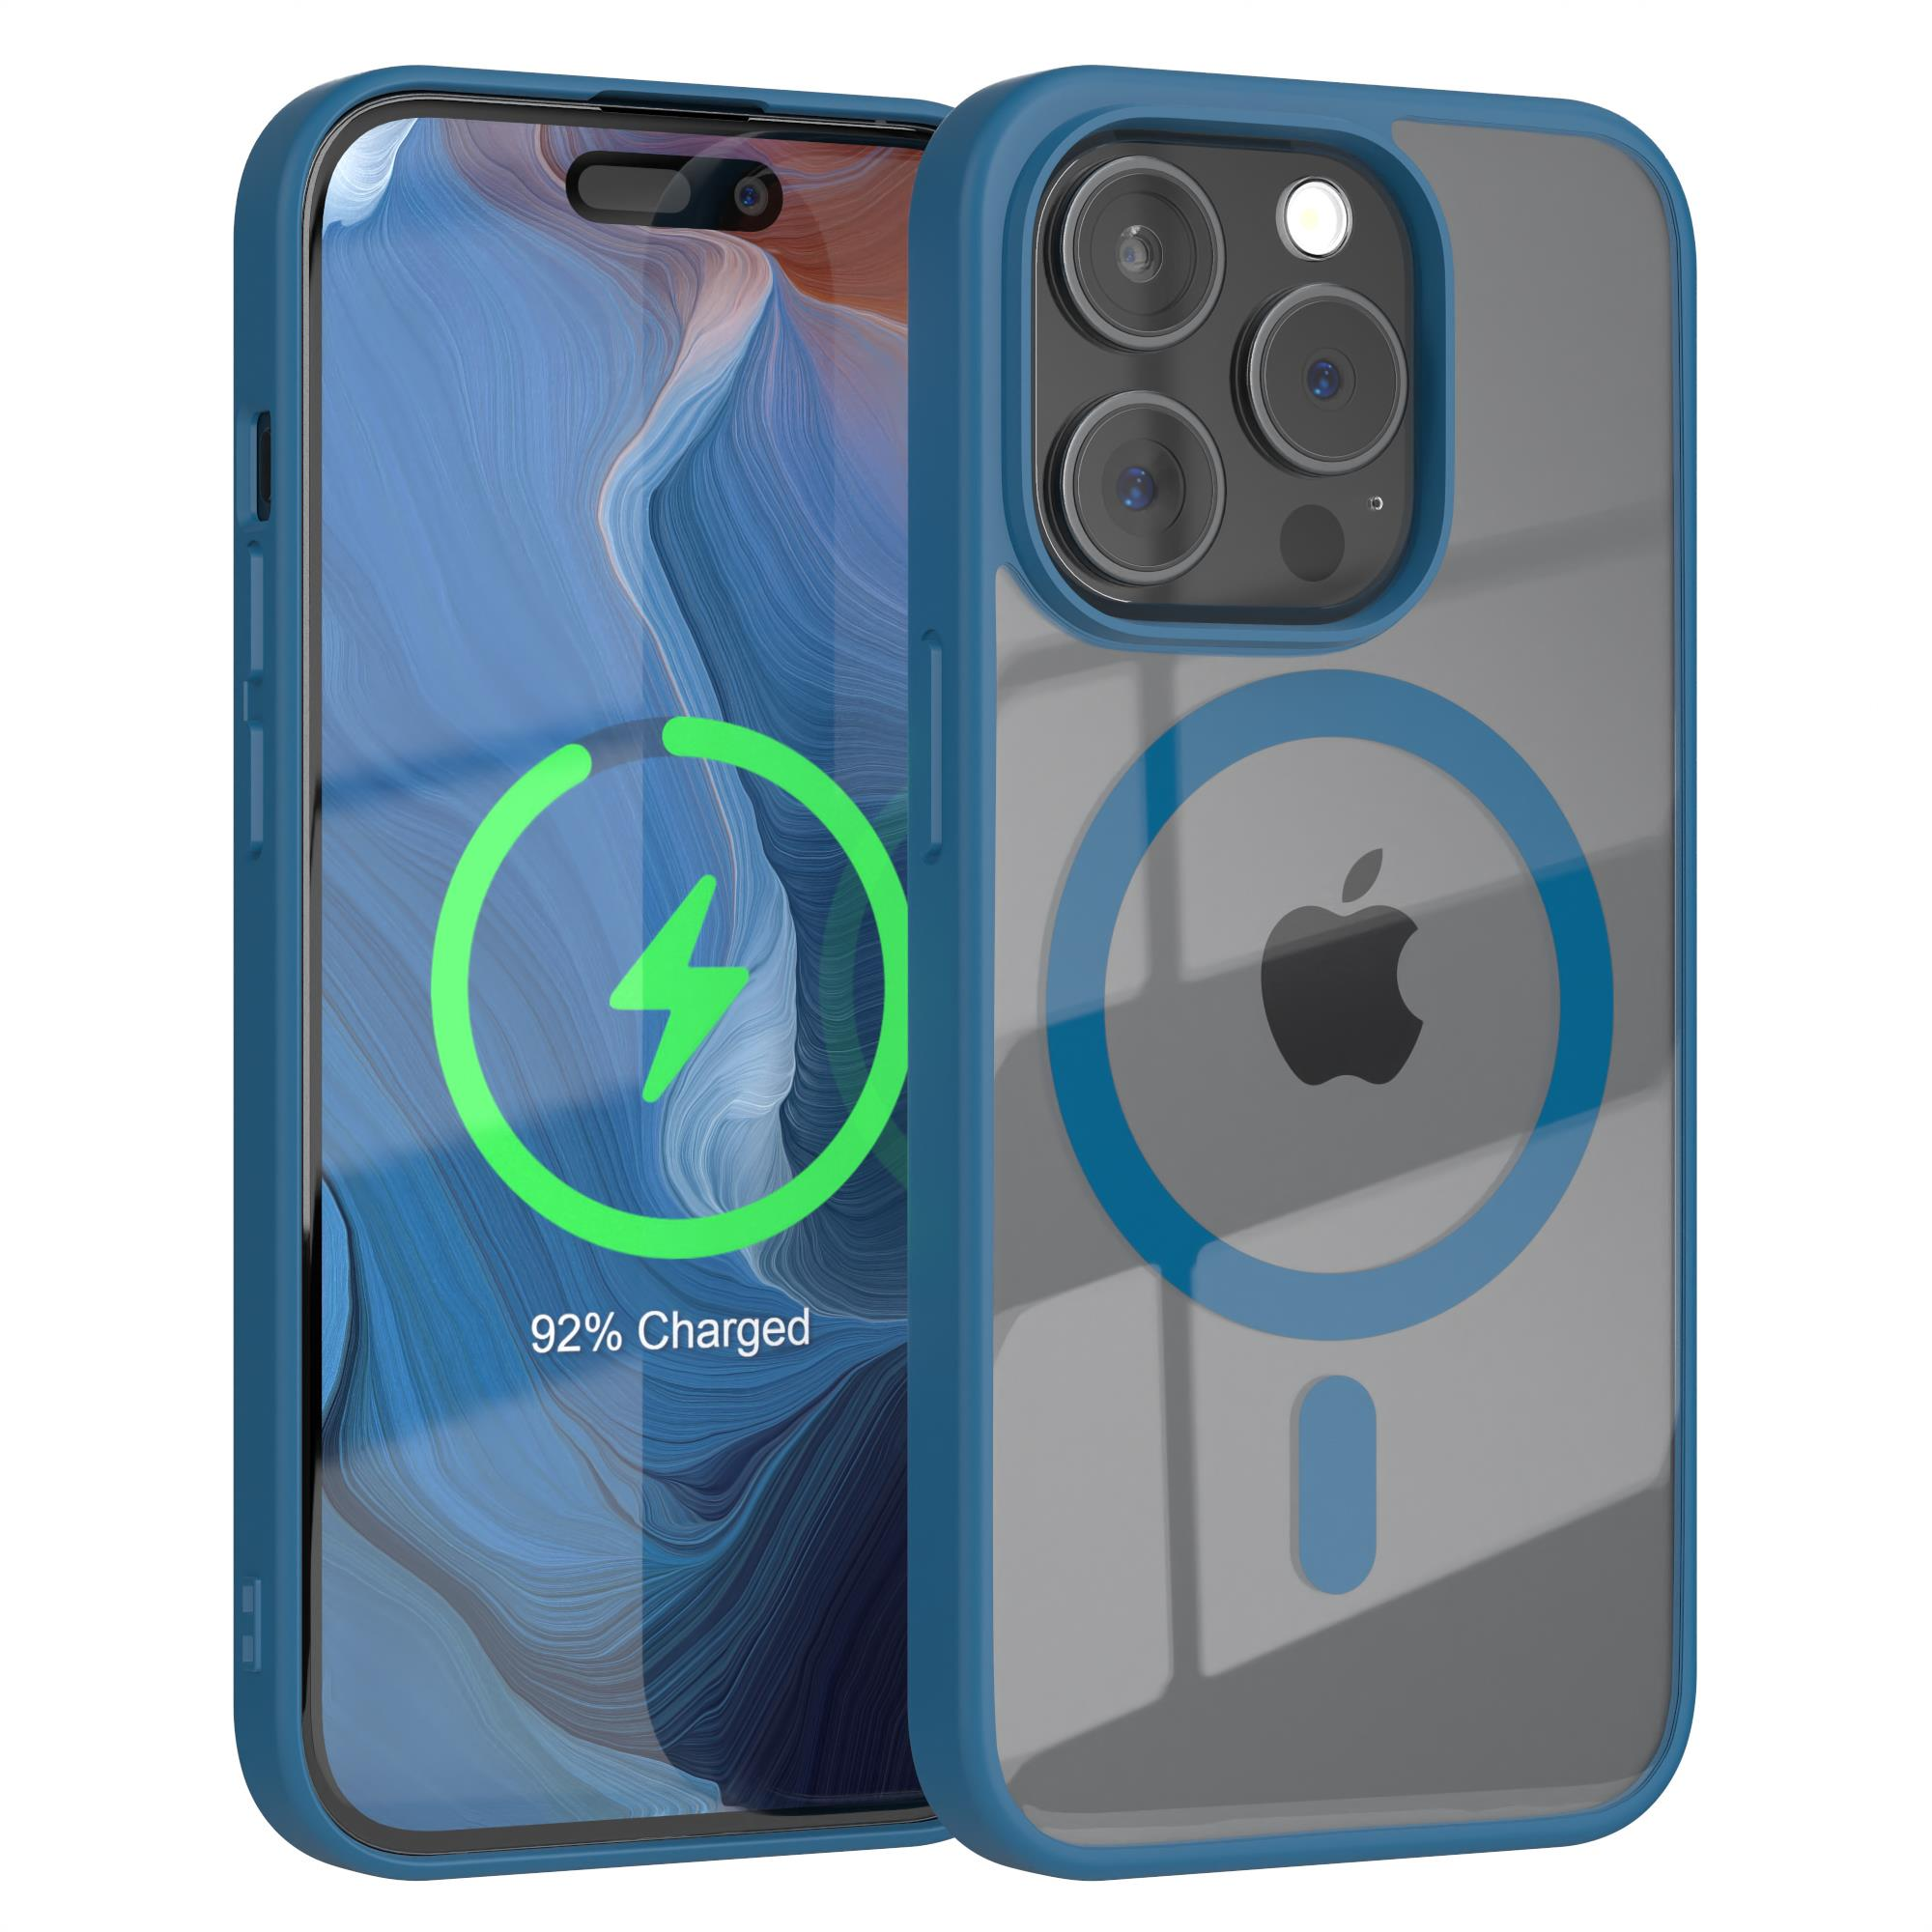 EAZY CASE Clear Cover mit Dunkelblau 15 iPhone Pro, Bumper, MagSafe, Apple